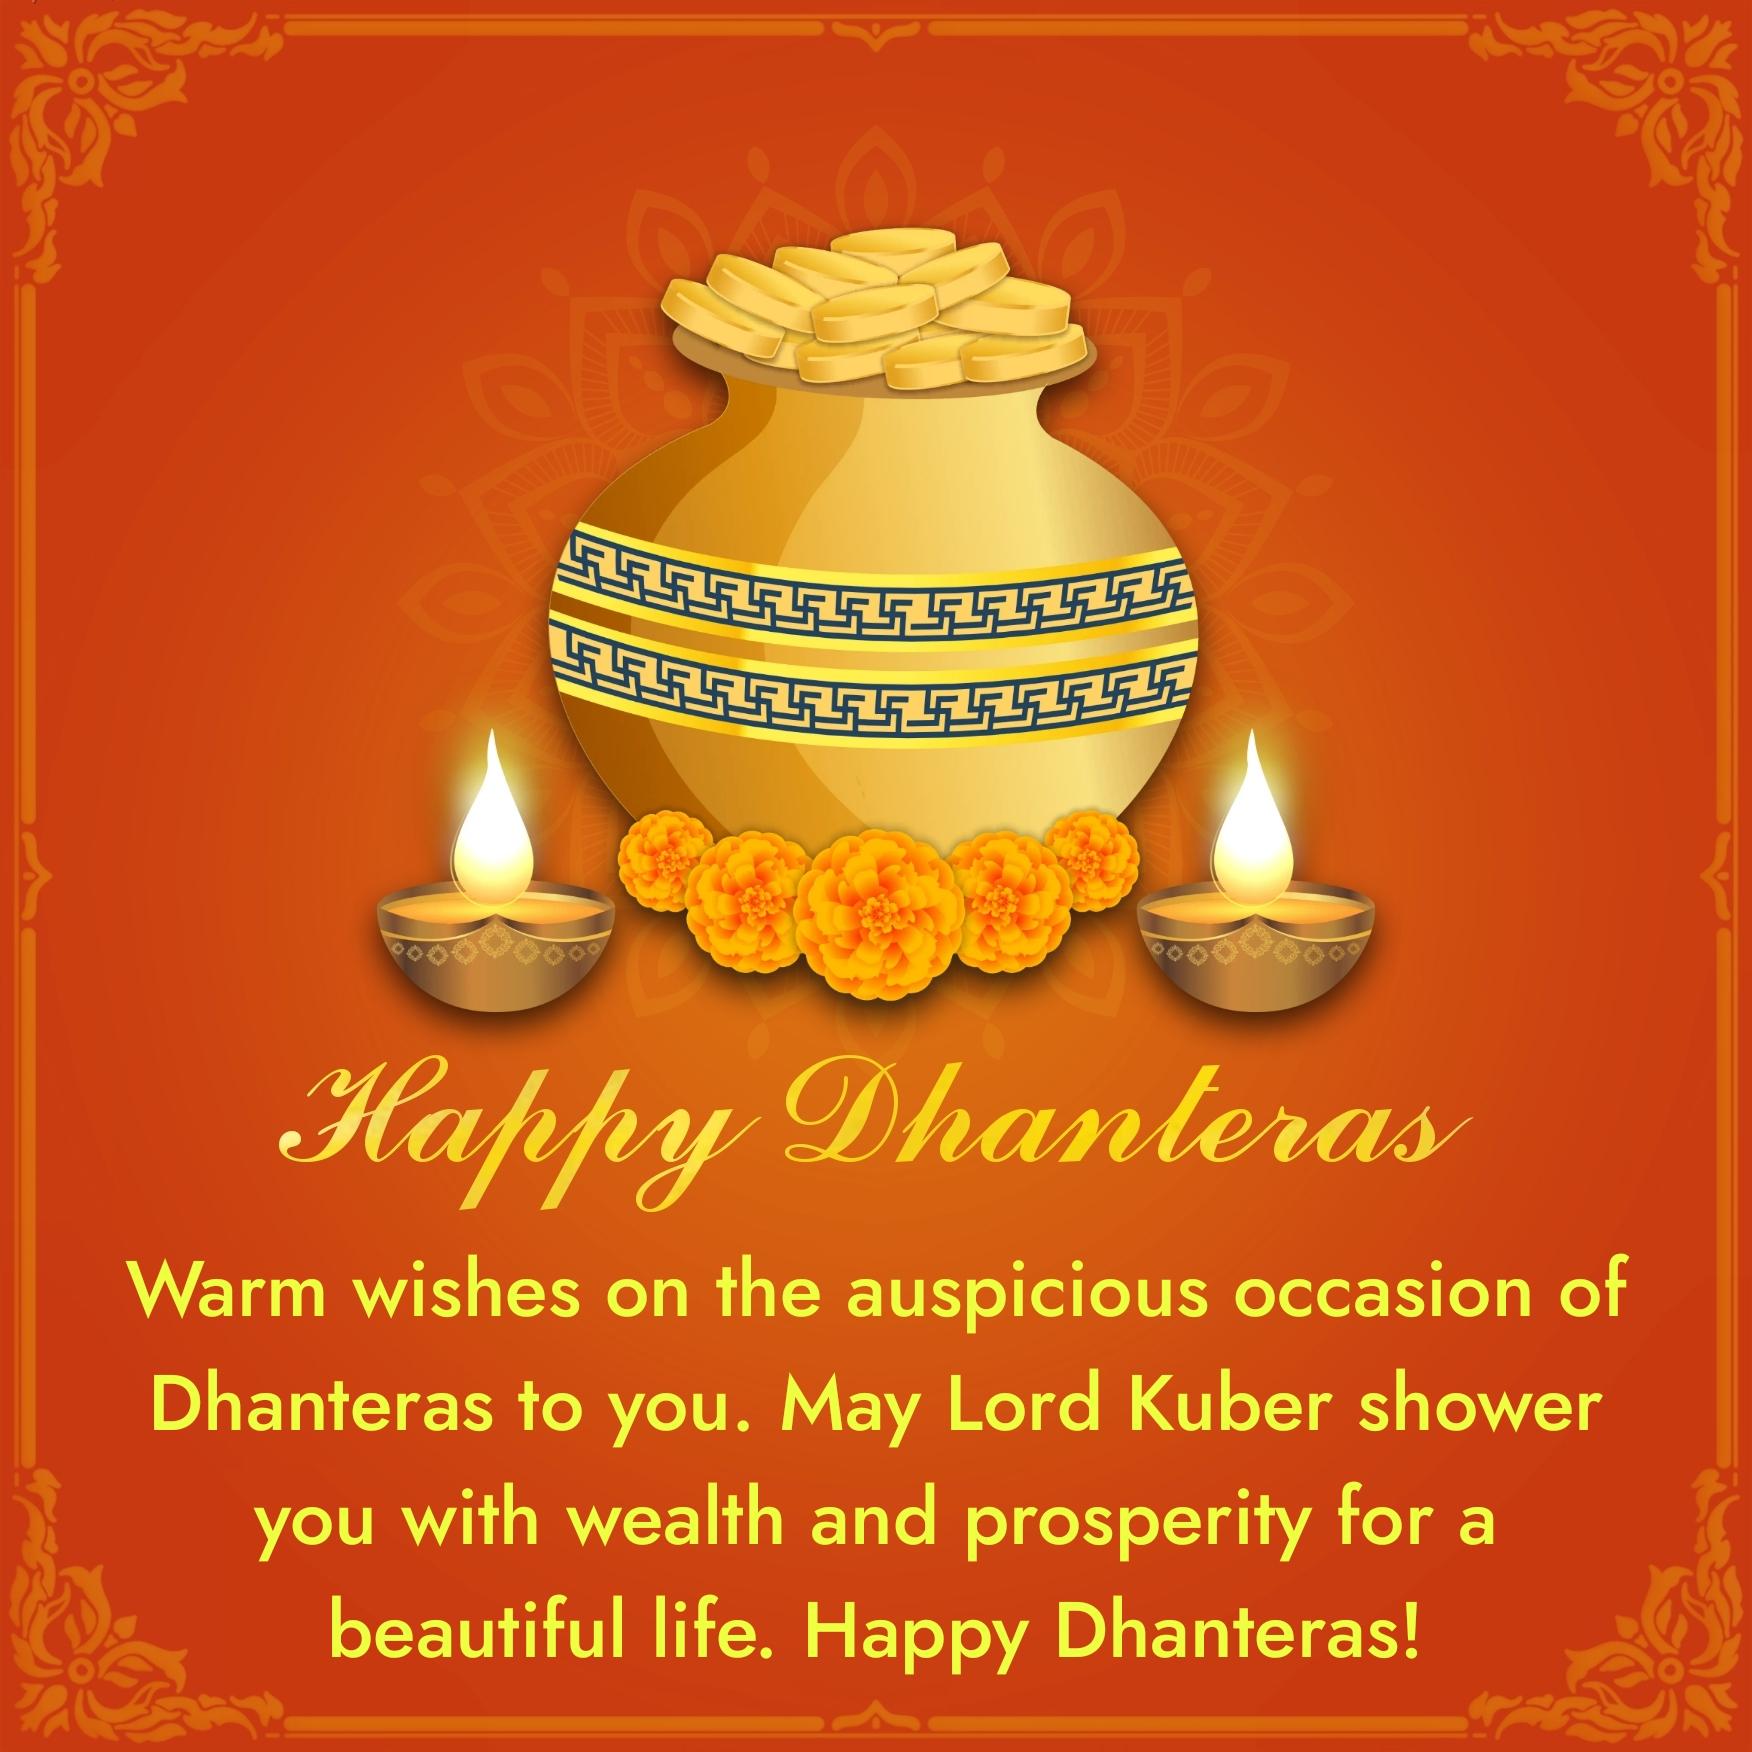 Warm wishes on the auspicious occasion of Dhanteras to you